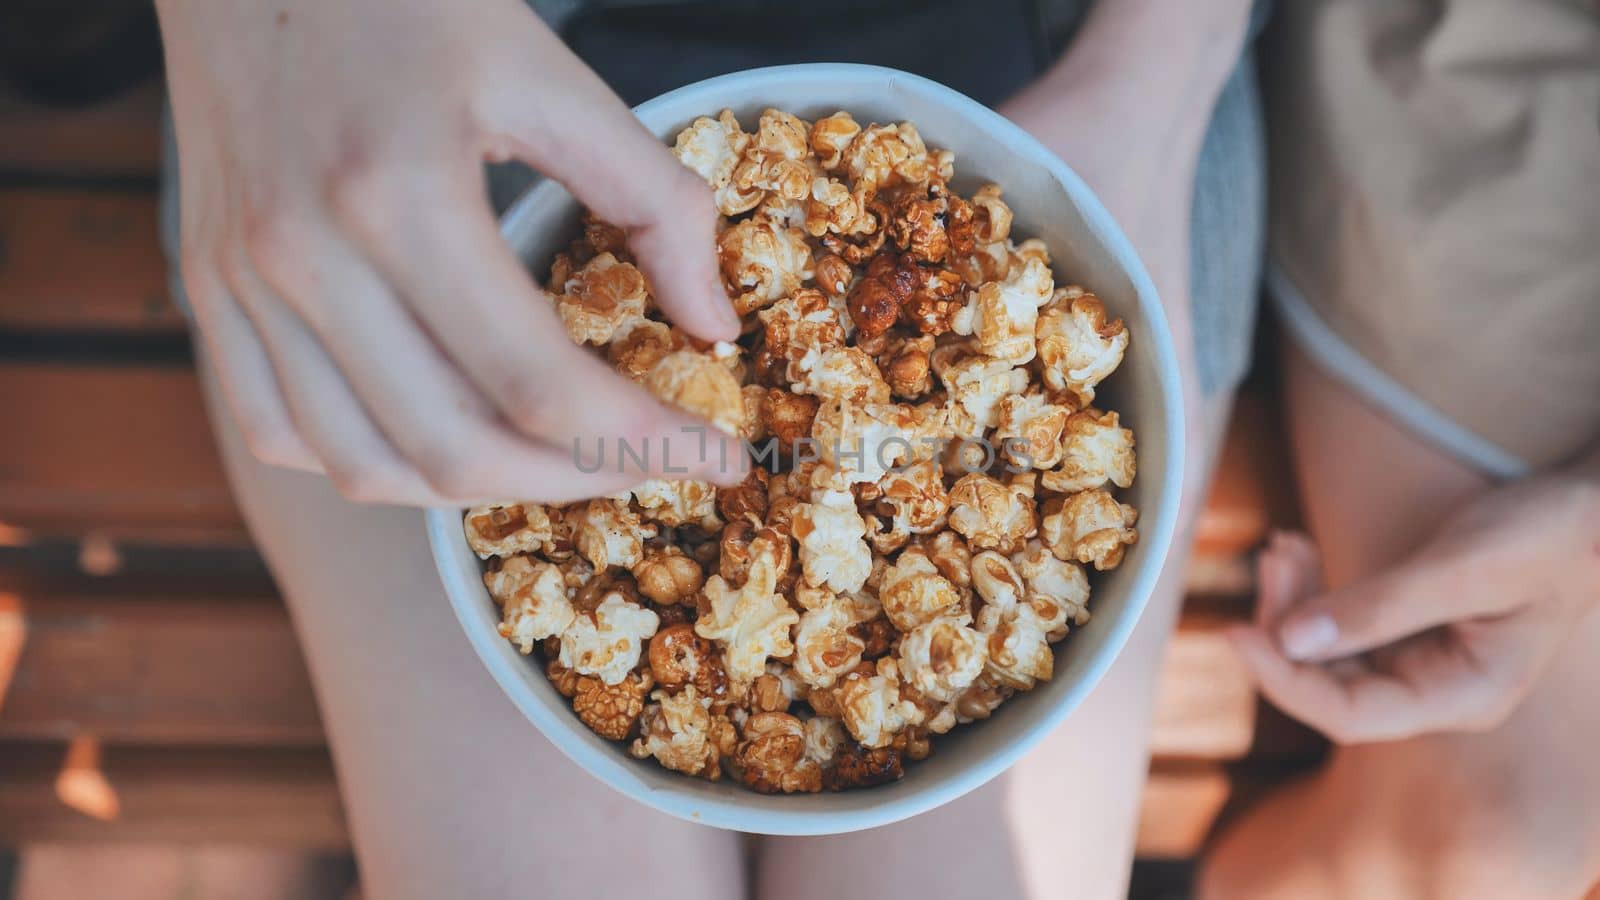 Friends eating popcorn on the street. Close-up of hands